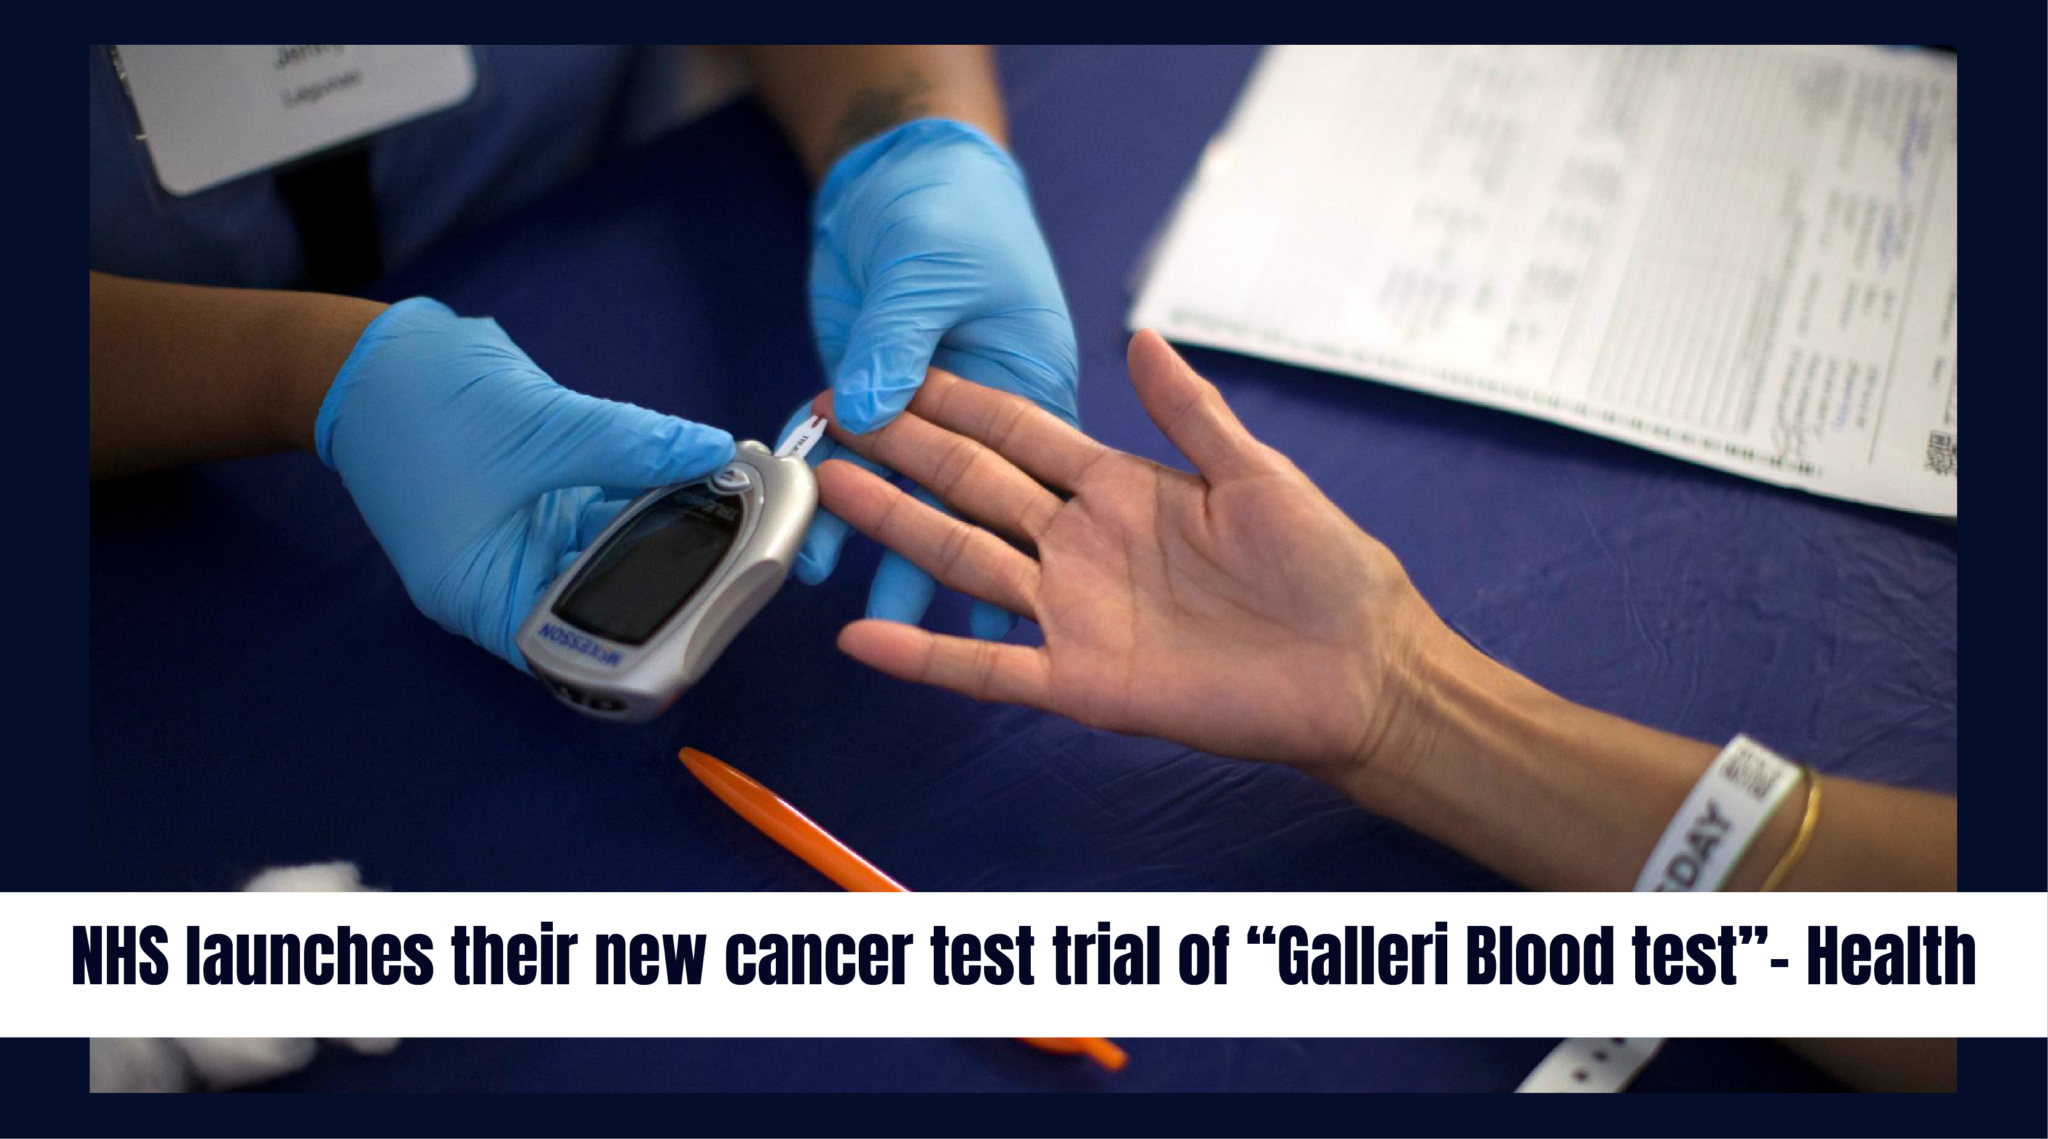 NHS launches their new cancer test trial of “Galleri Blood test”- Health